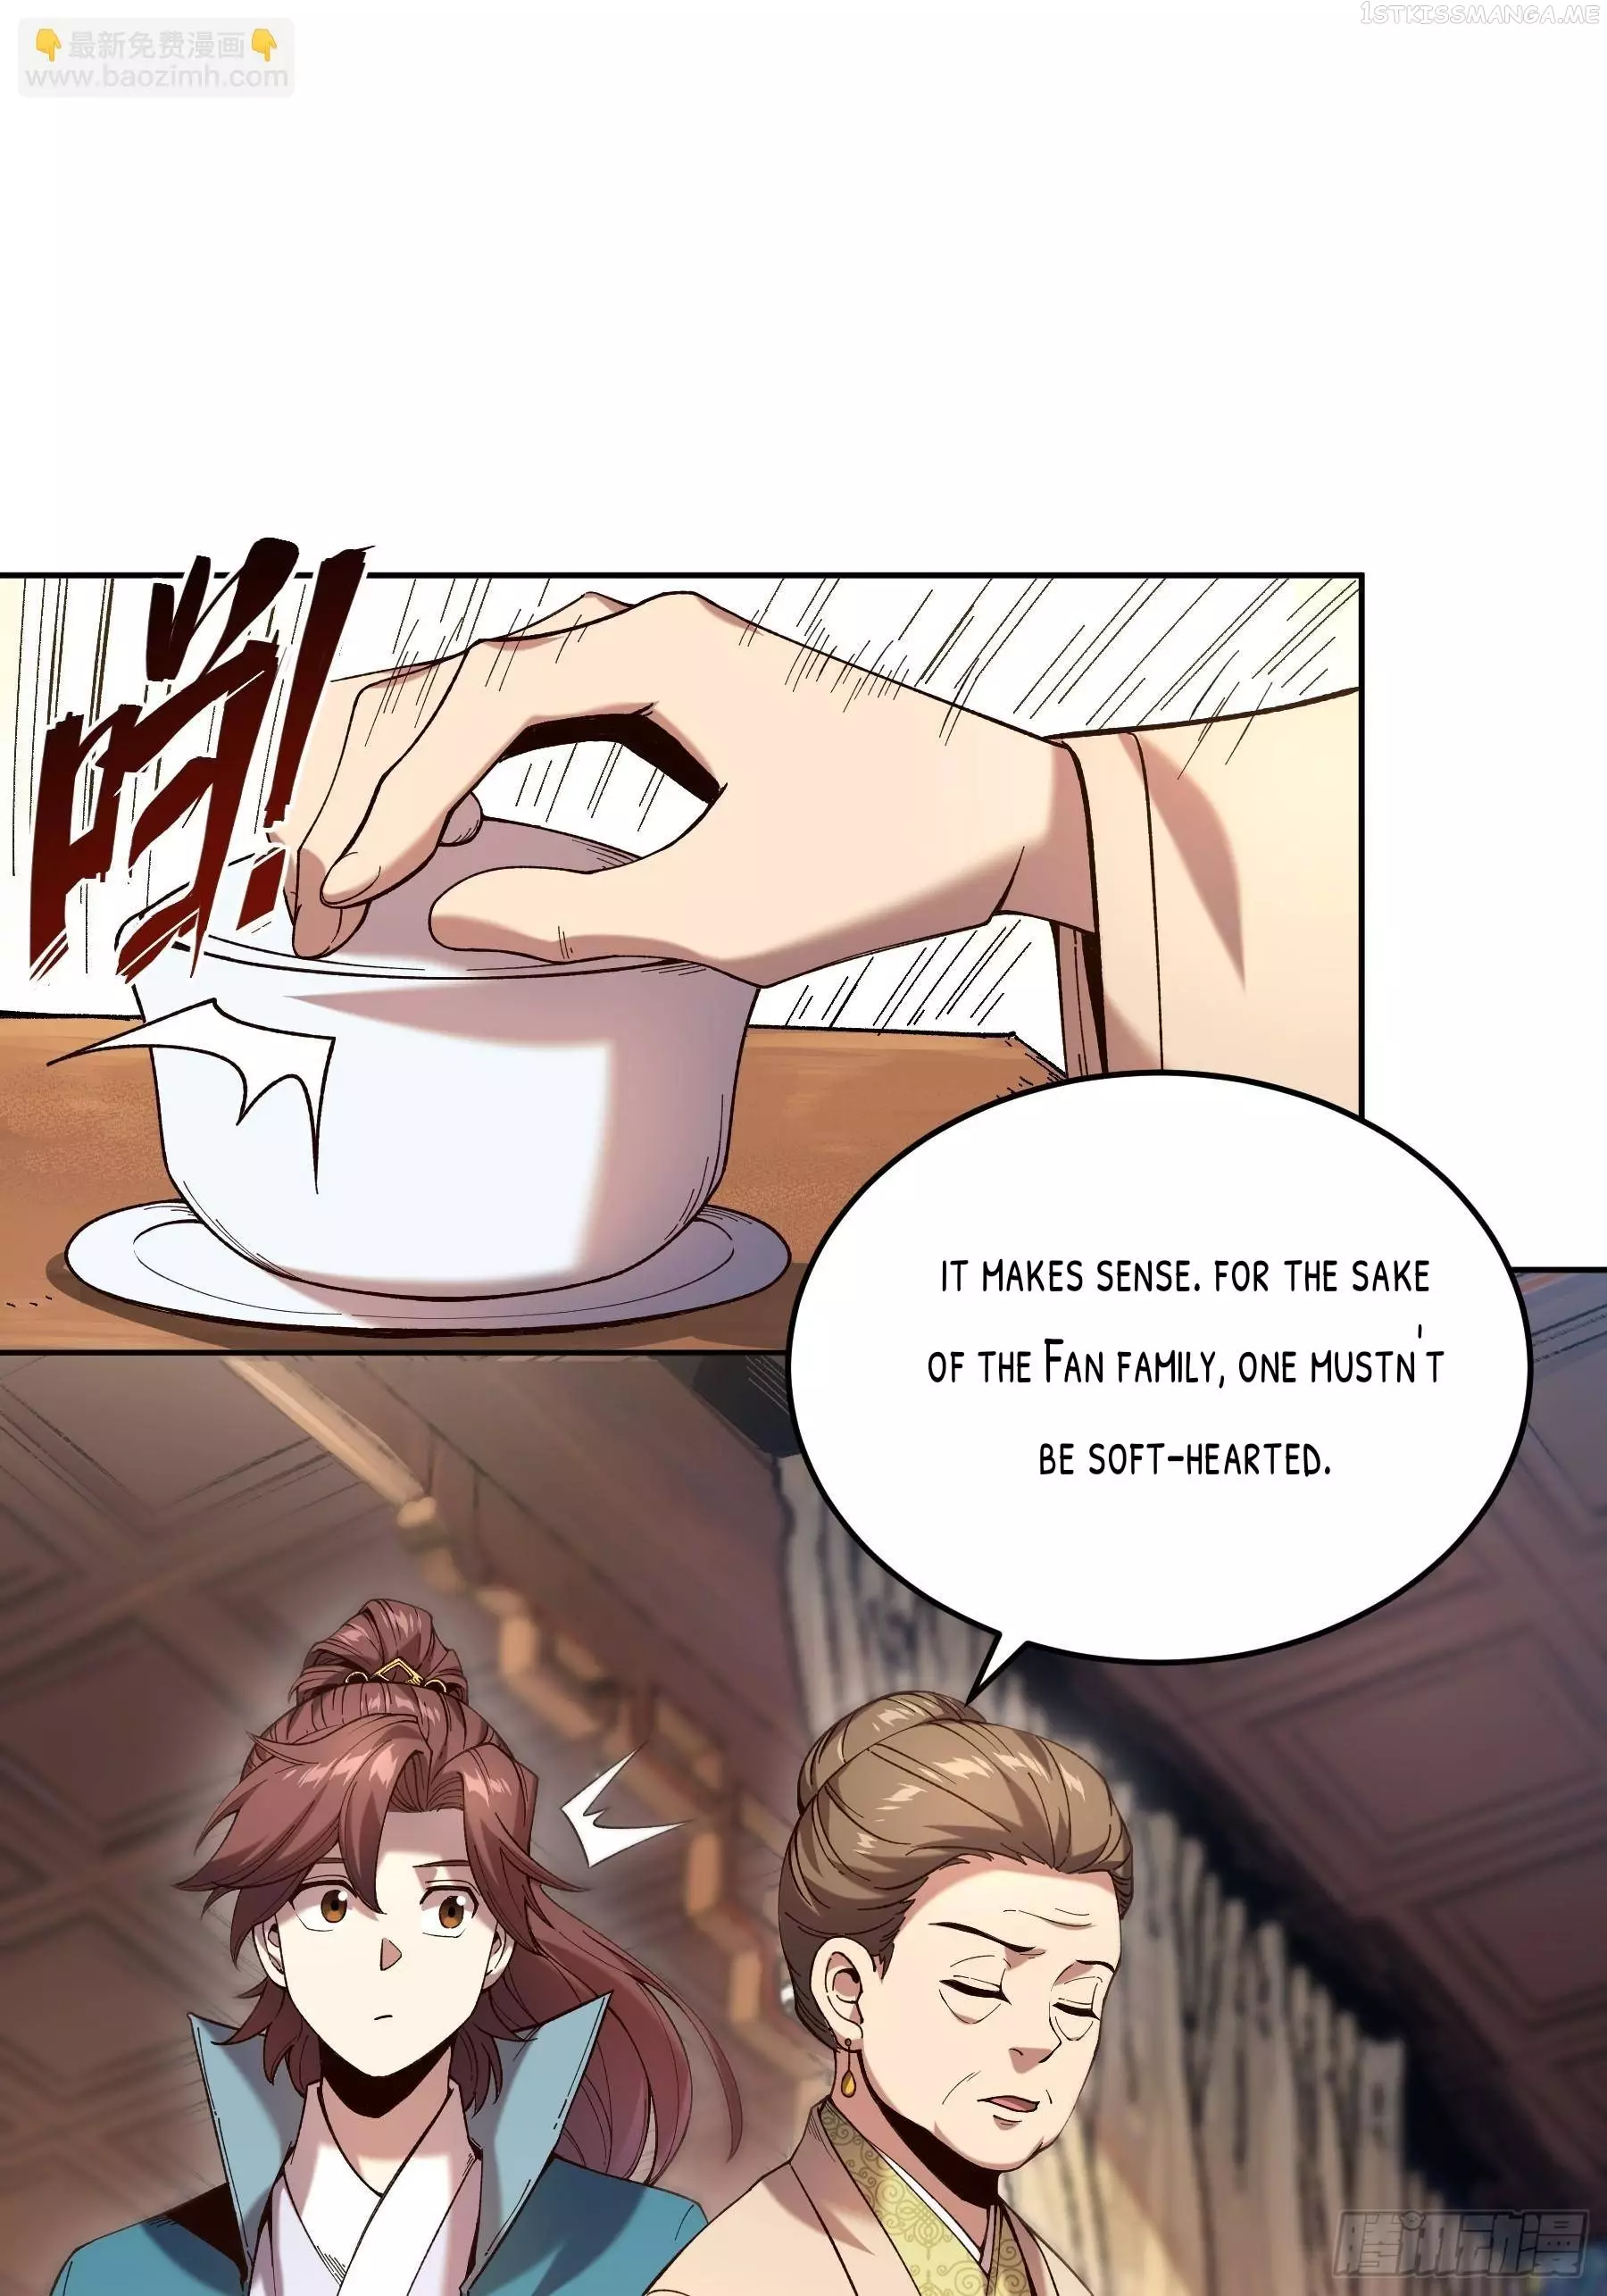 Celebrating The Remaining Life - 24 page 7-4e0a9515